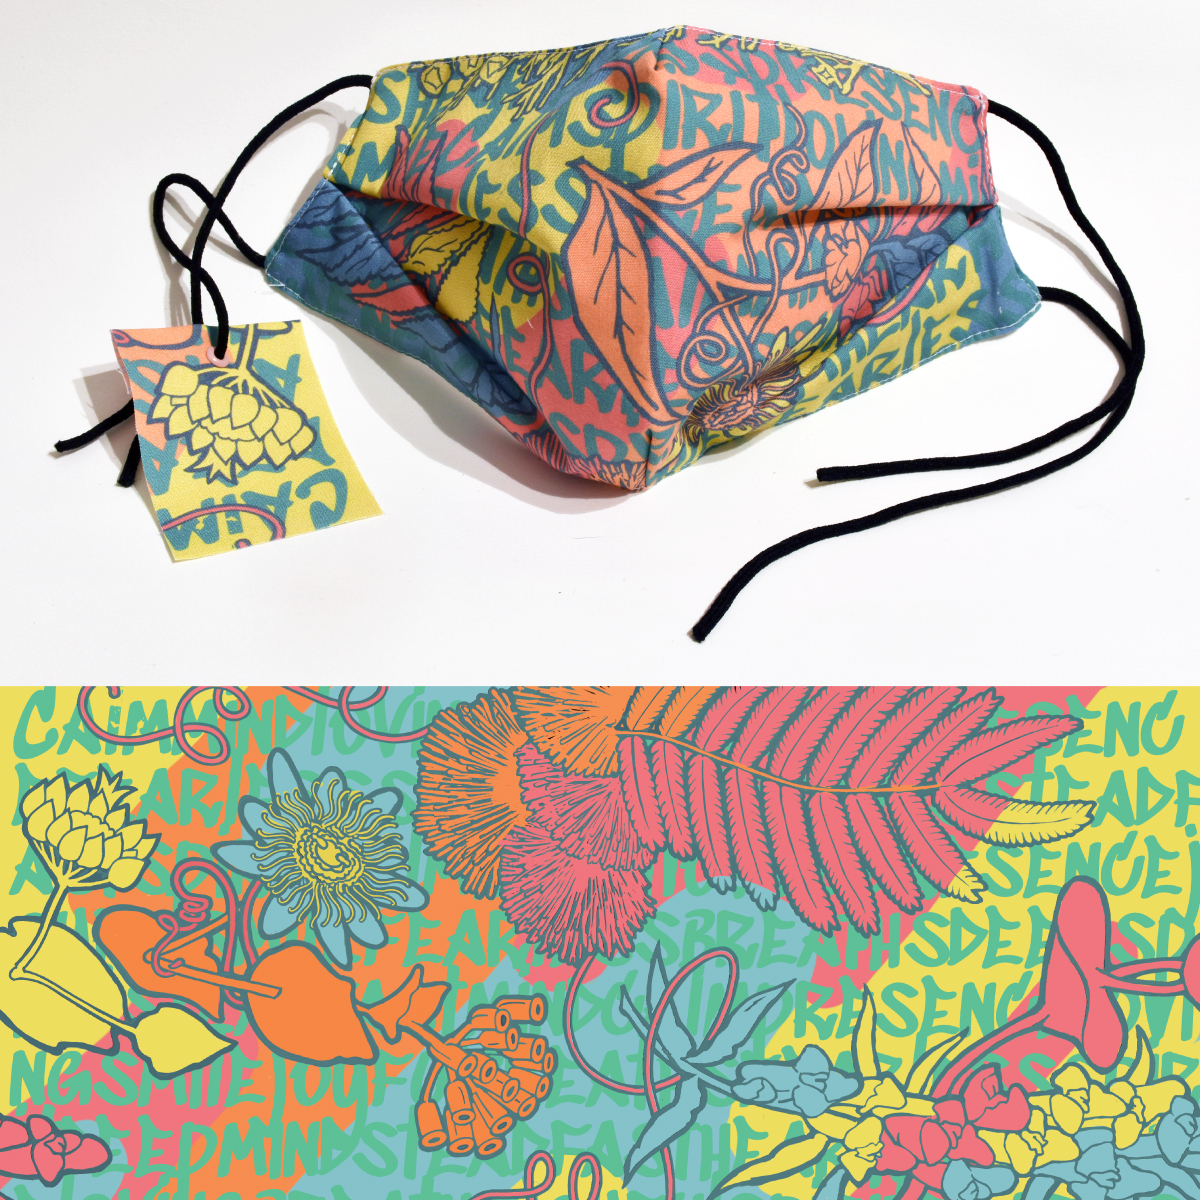 Photo of a fabric mask above a detail image of the fabric pattern, realistic line-drawings of flowers and plants combined with patches of pastel colors and obscuring horizontal rows of capital letters in a handwritten font style.